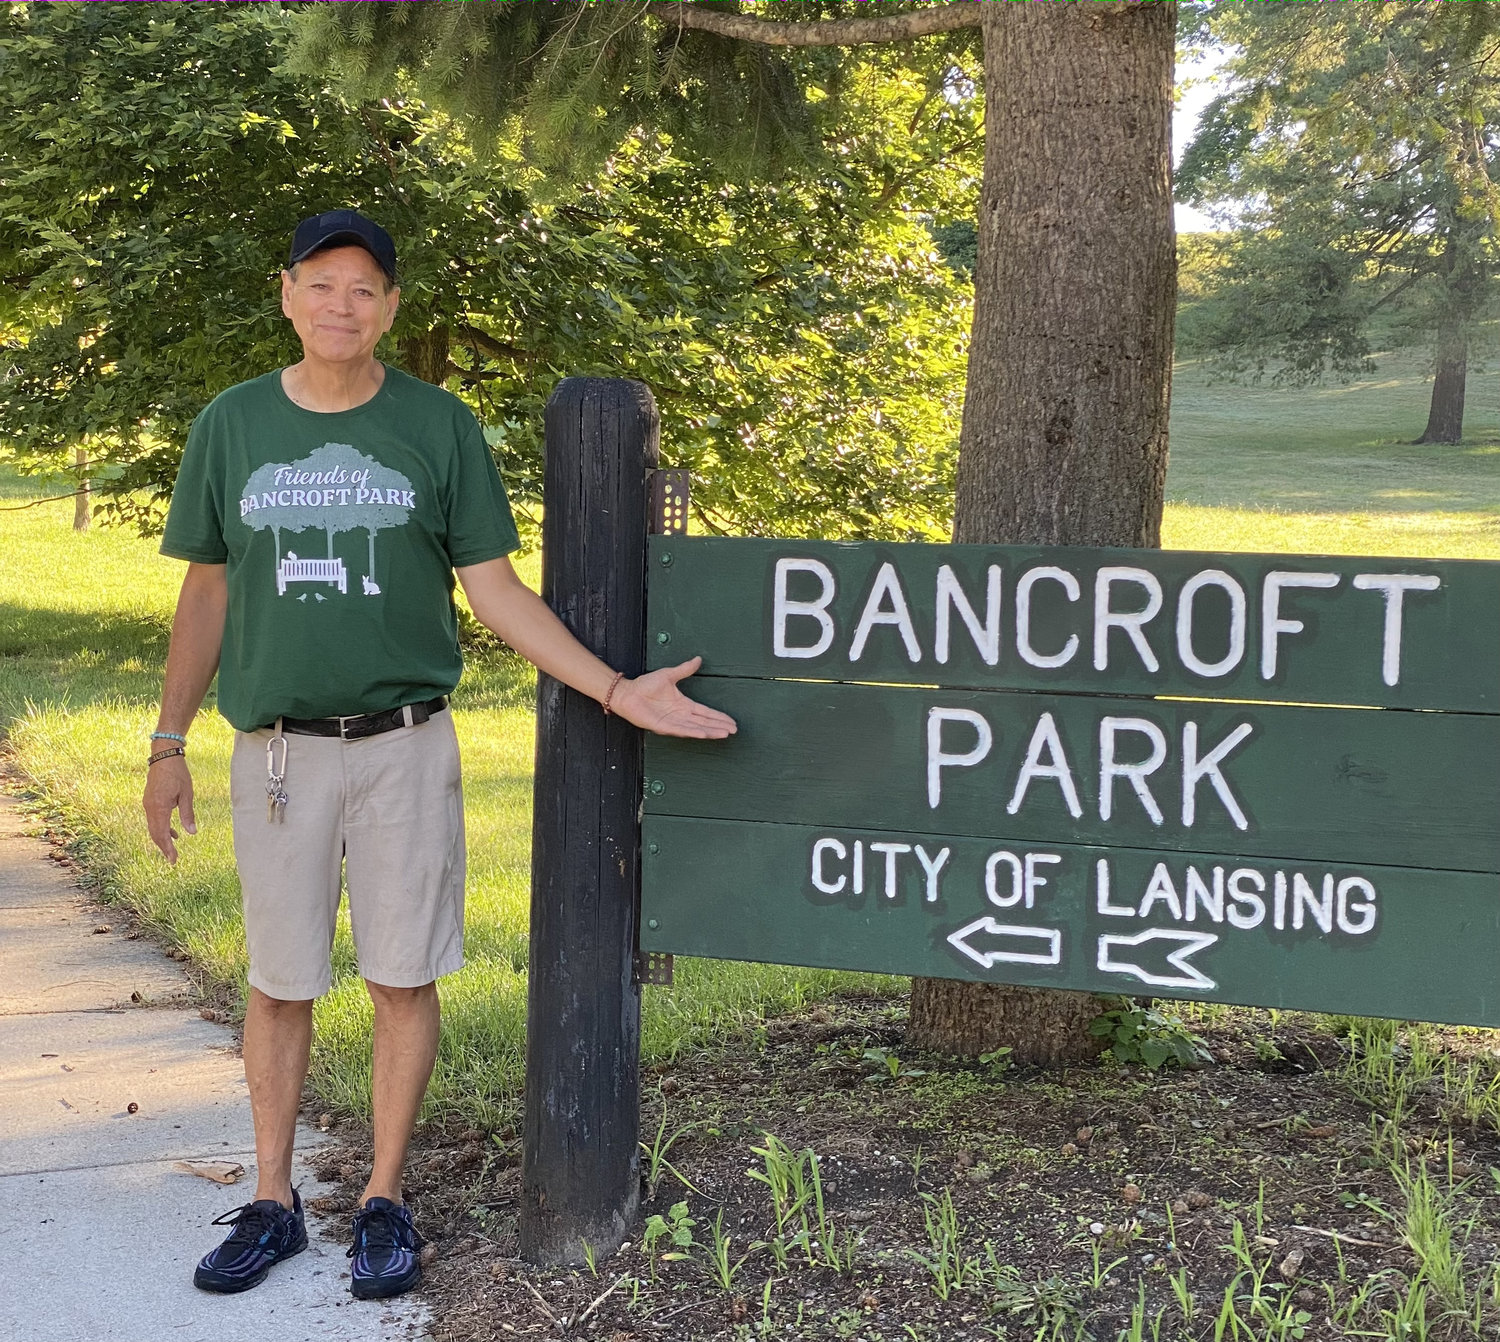 Glenn Lopez is the president of the Friends of Bancroft Park, which is next to Groesbeck Golf Course. “We don’t want a driving range,” he says.